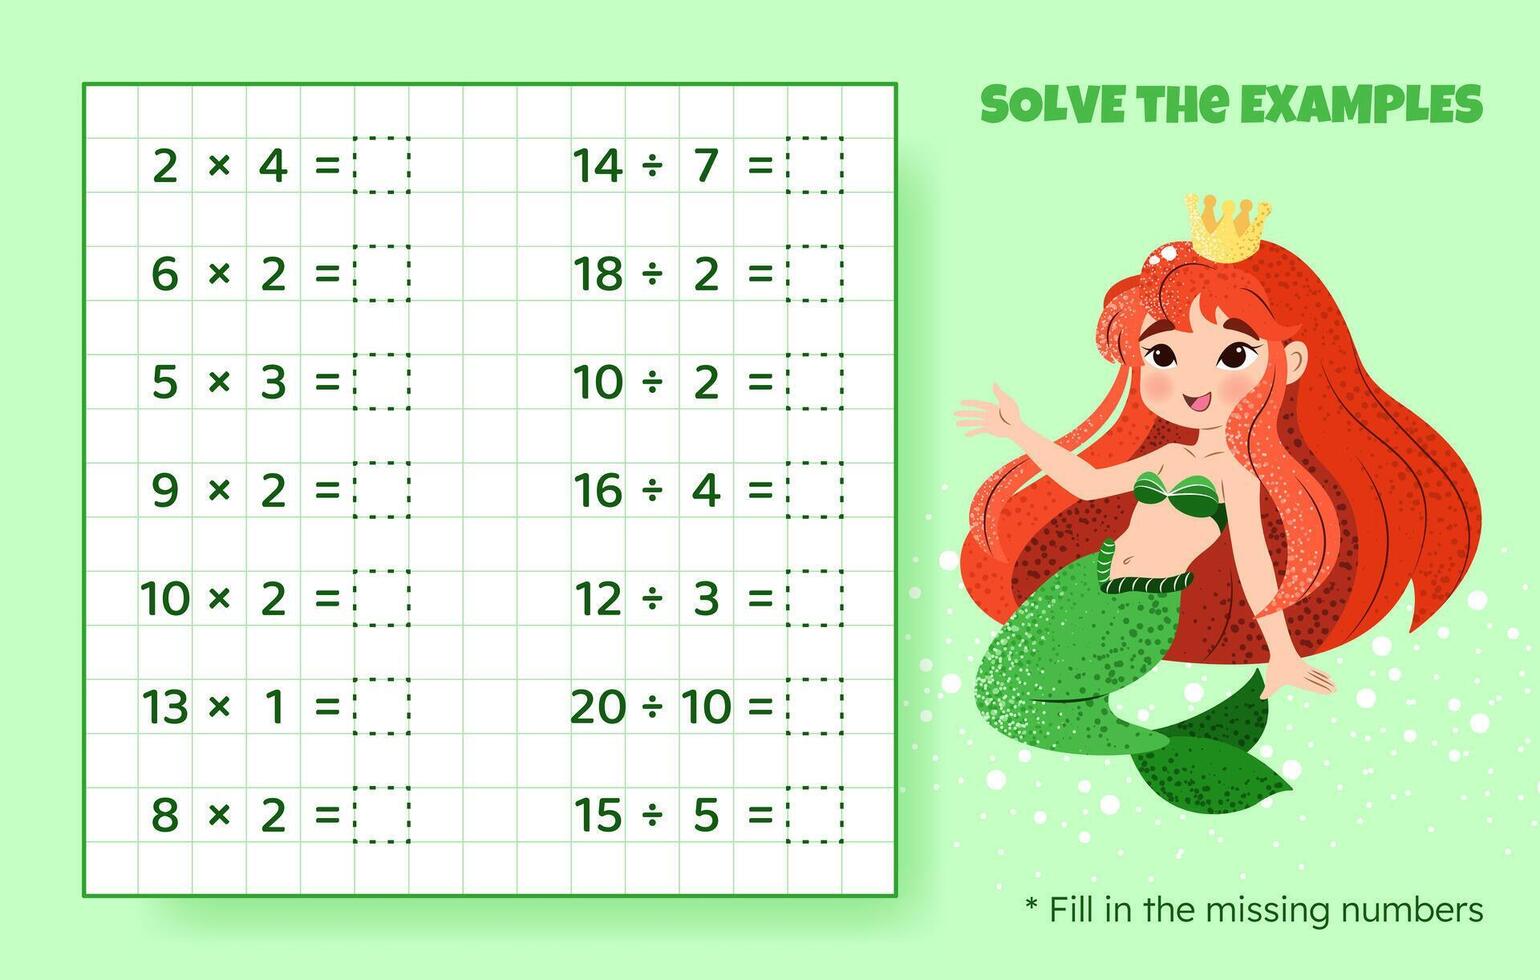 Solve the examples. Multiplication and division up to 20. Mathematical puzzle game. Worksheet for preschool kids. illustration. Cartoon educational game with cute mermaid for children. vector